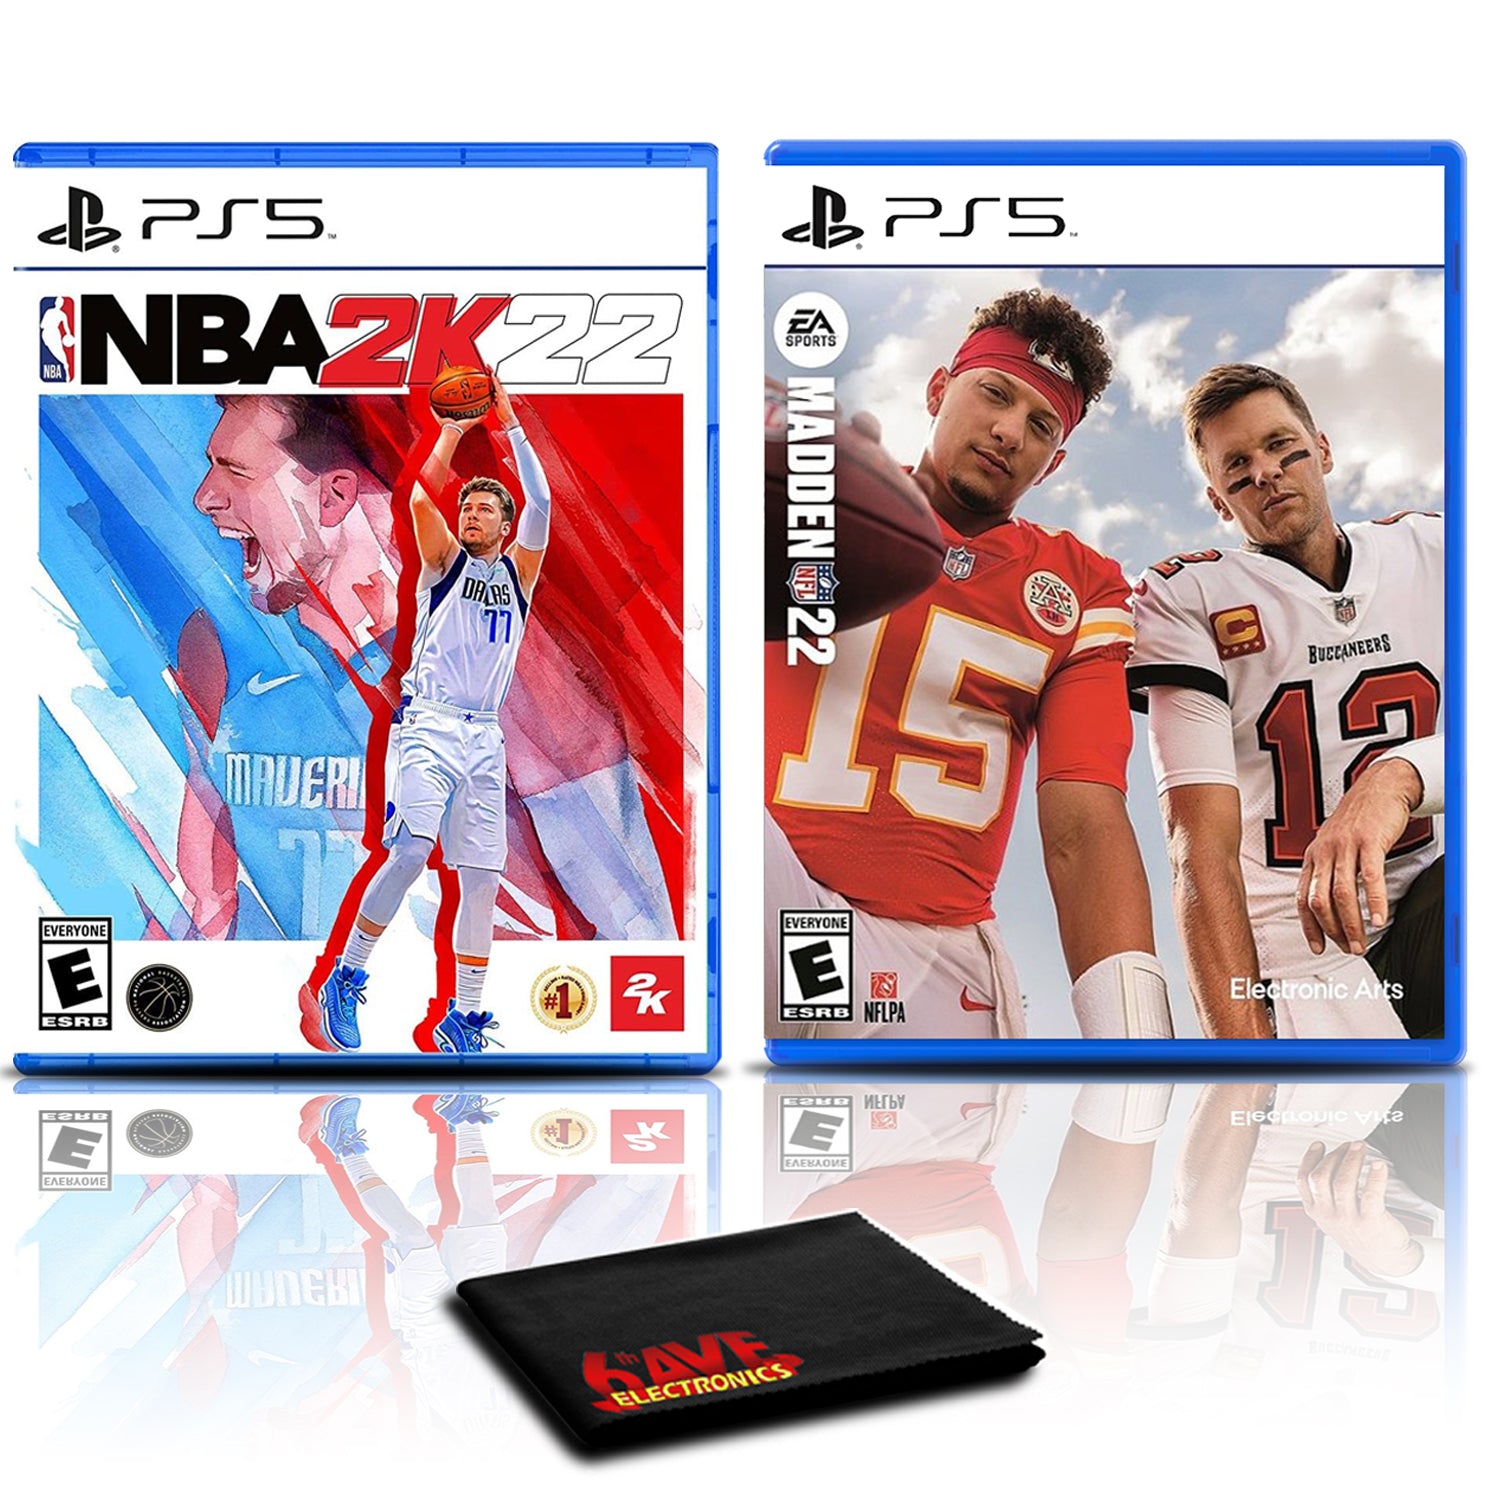 NBA 2K22 and Madden NFL 22 - Two Games for PlayStation 5